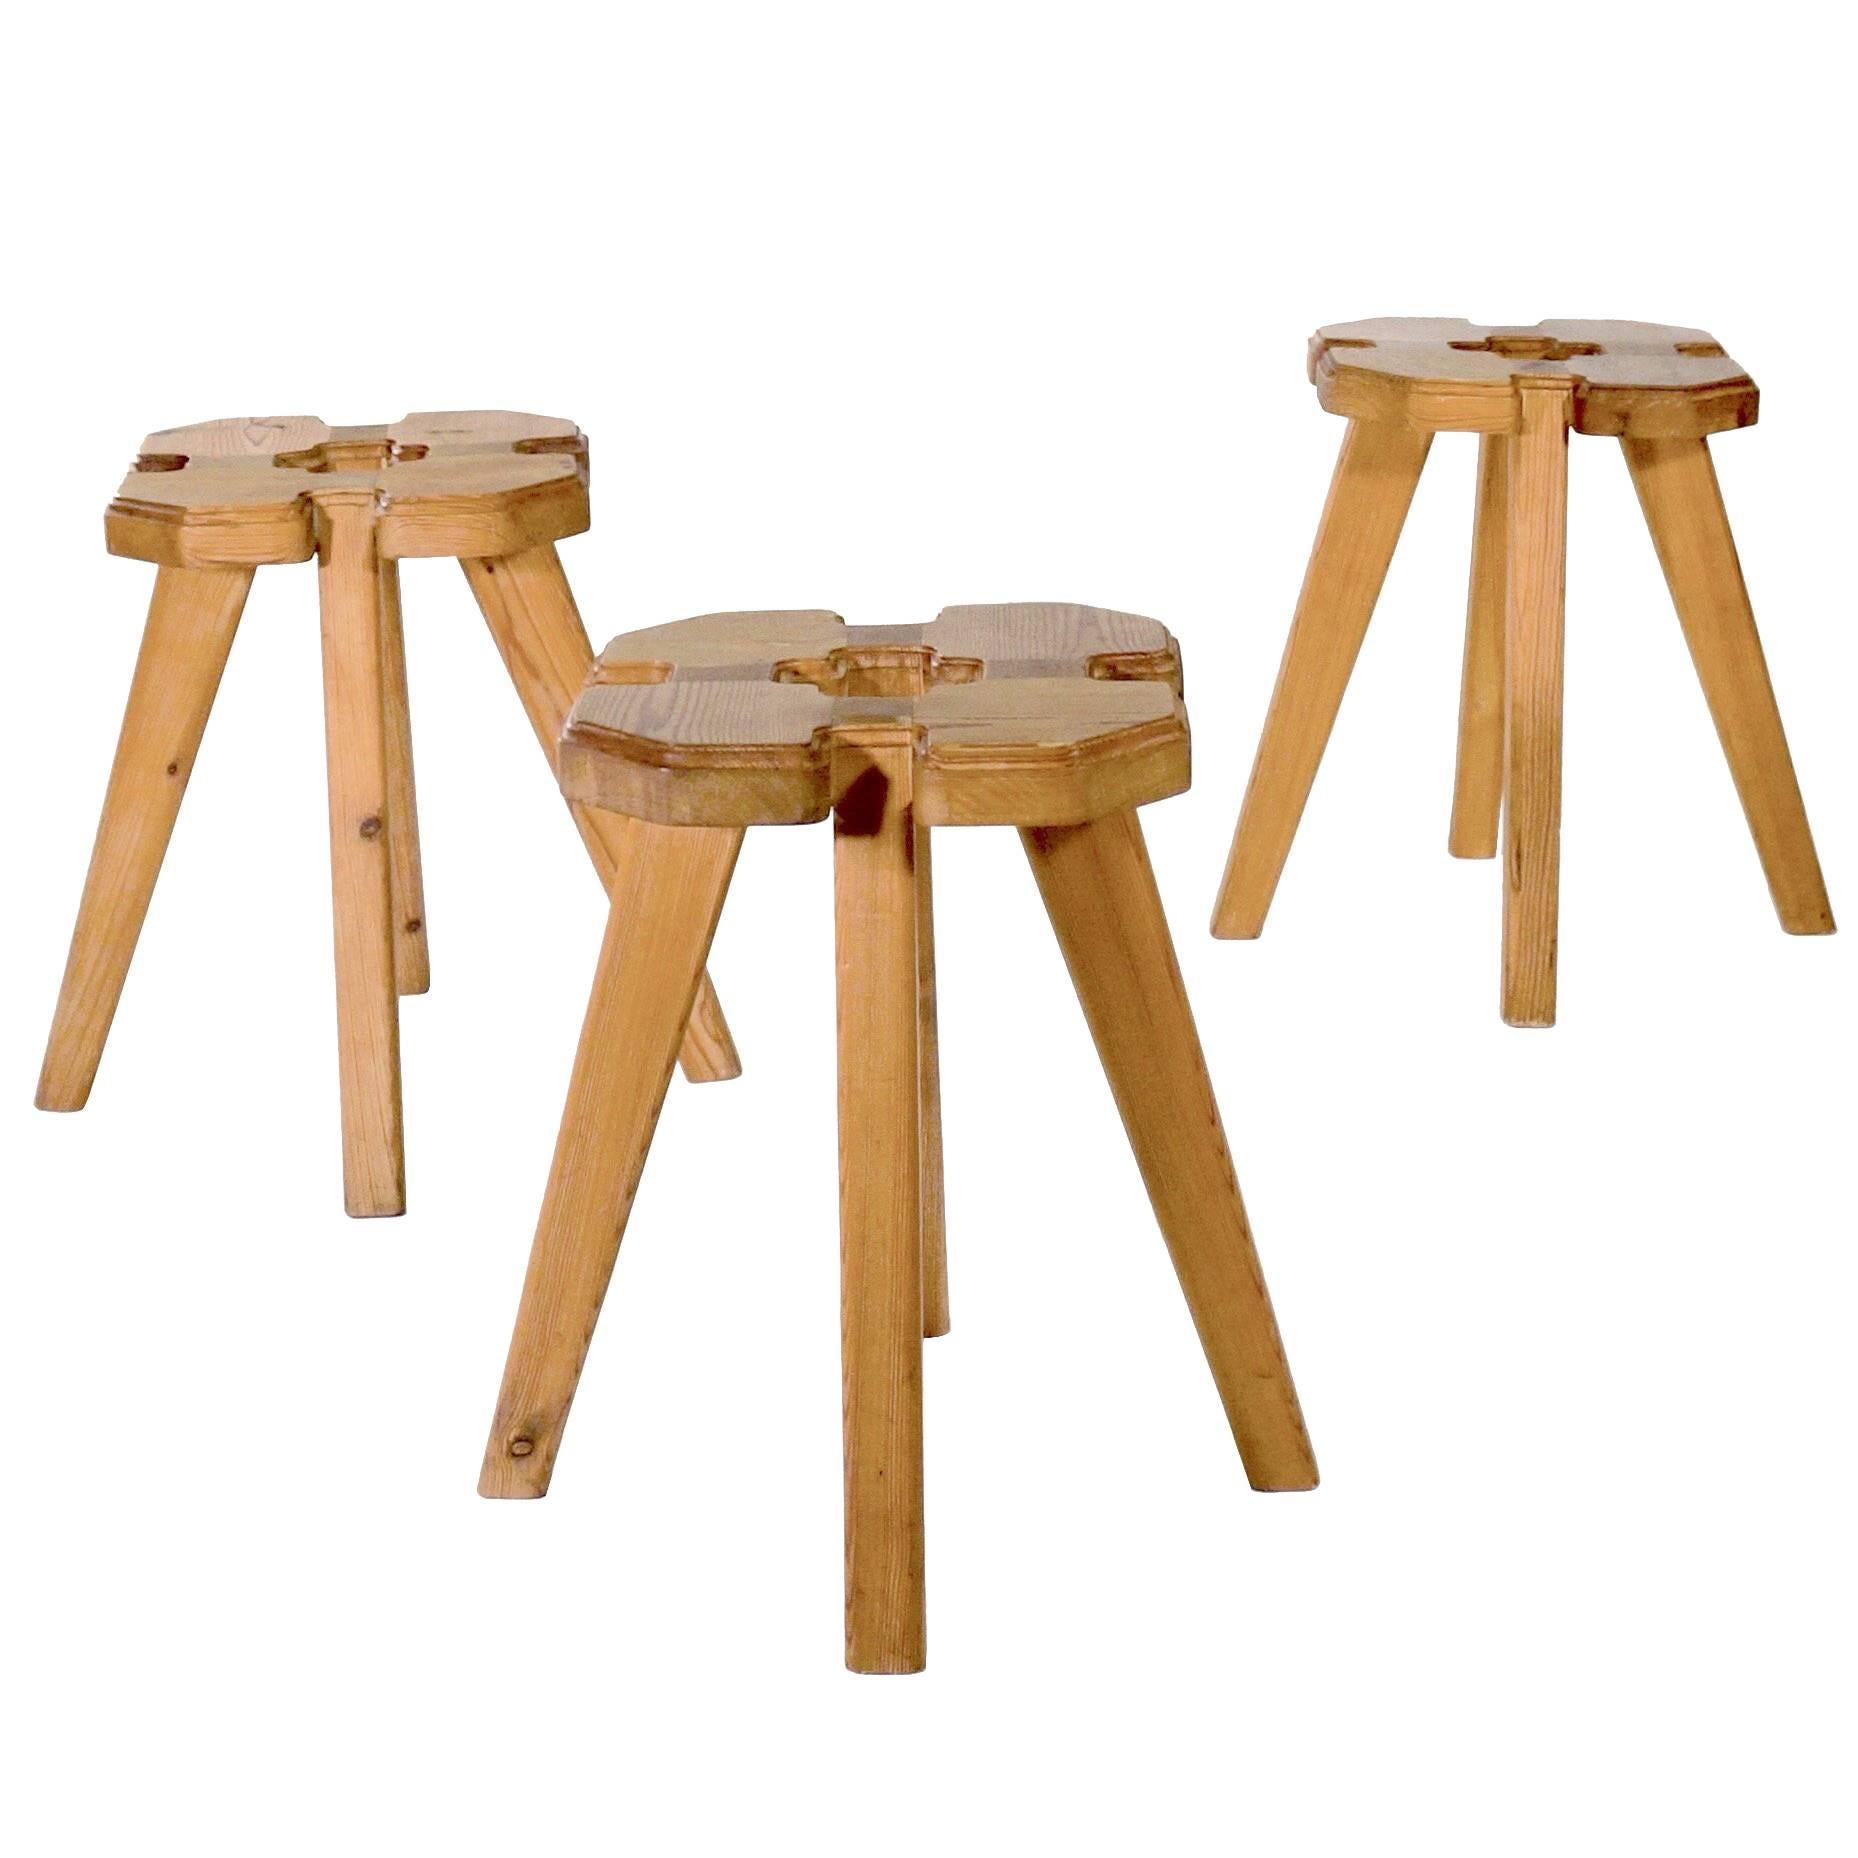 Collection of Three Pitch Pine Stools